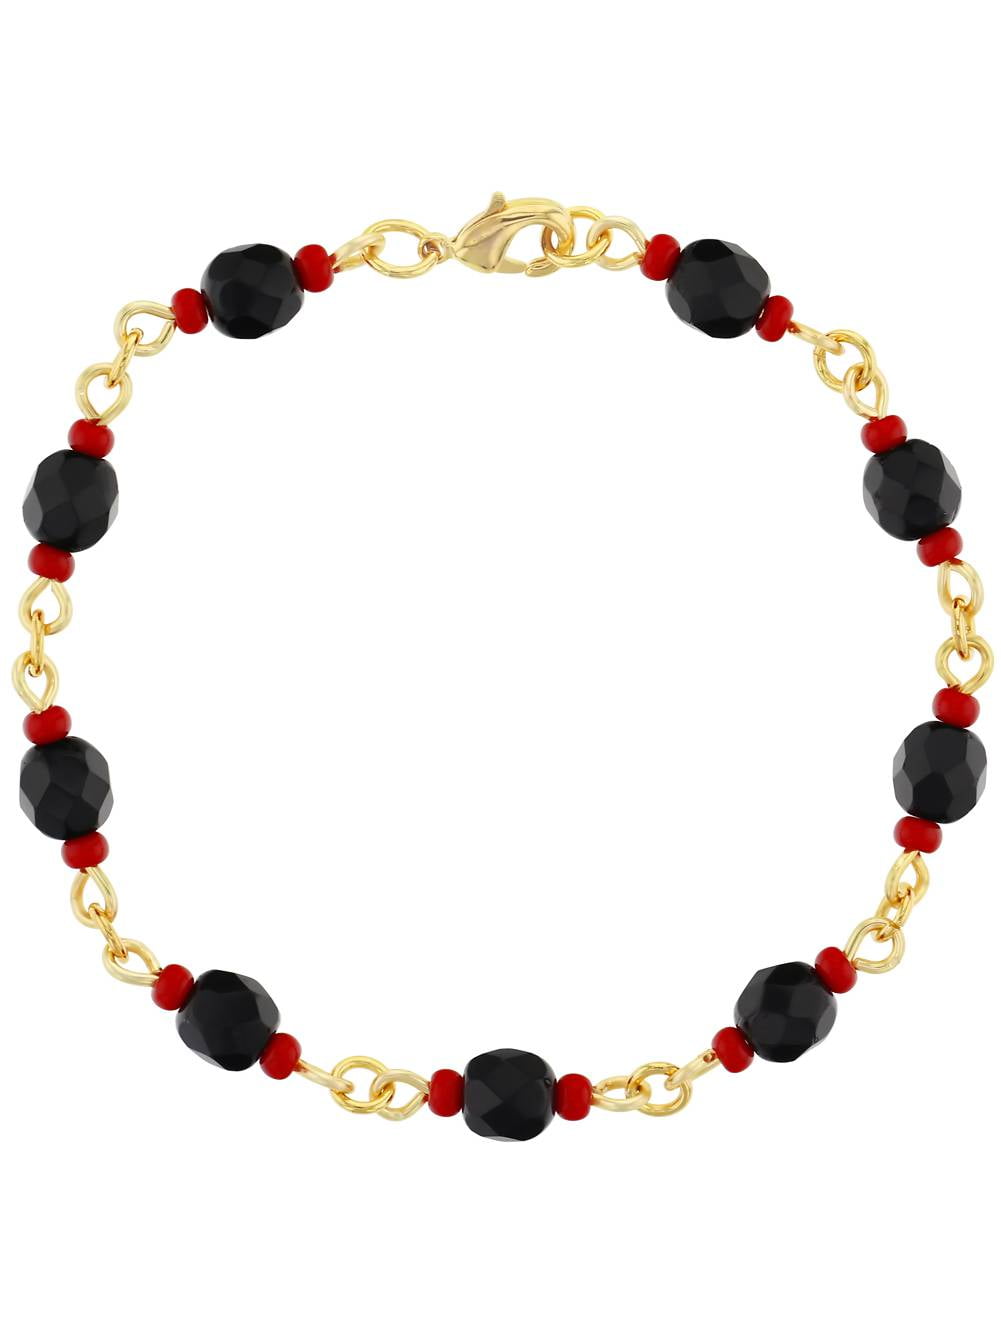 Santayana Azabache Bracelet Because You Need This in 2020 - My Big Fat  Cuban Family